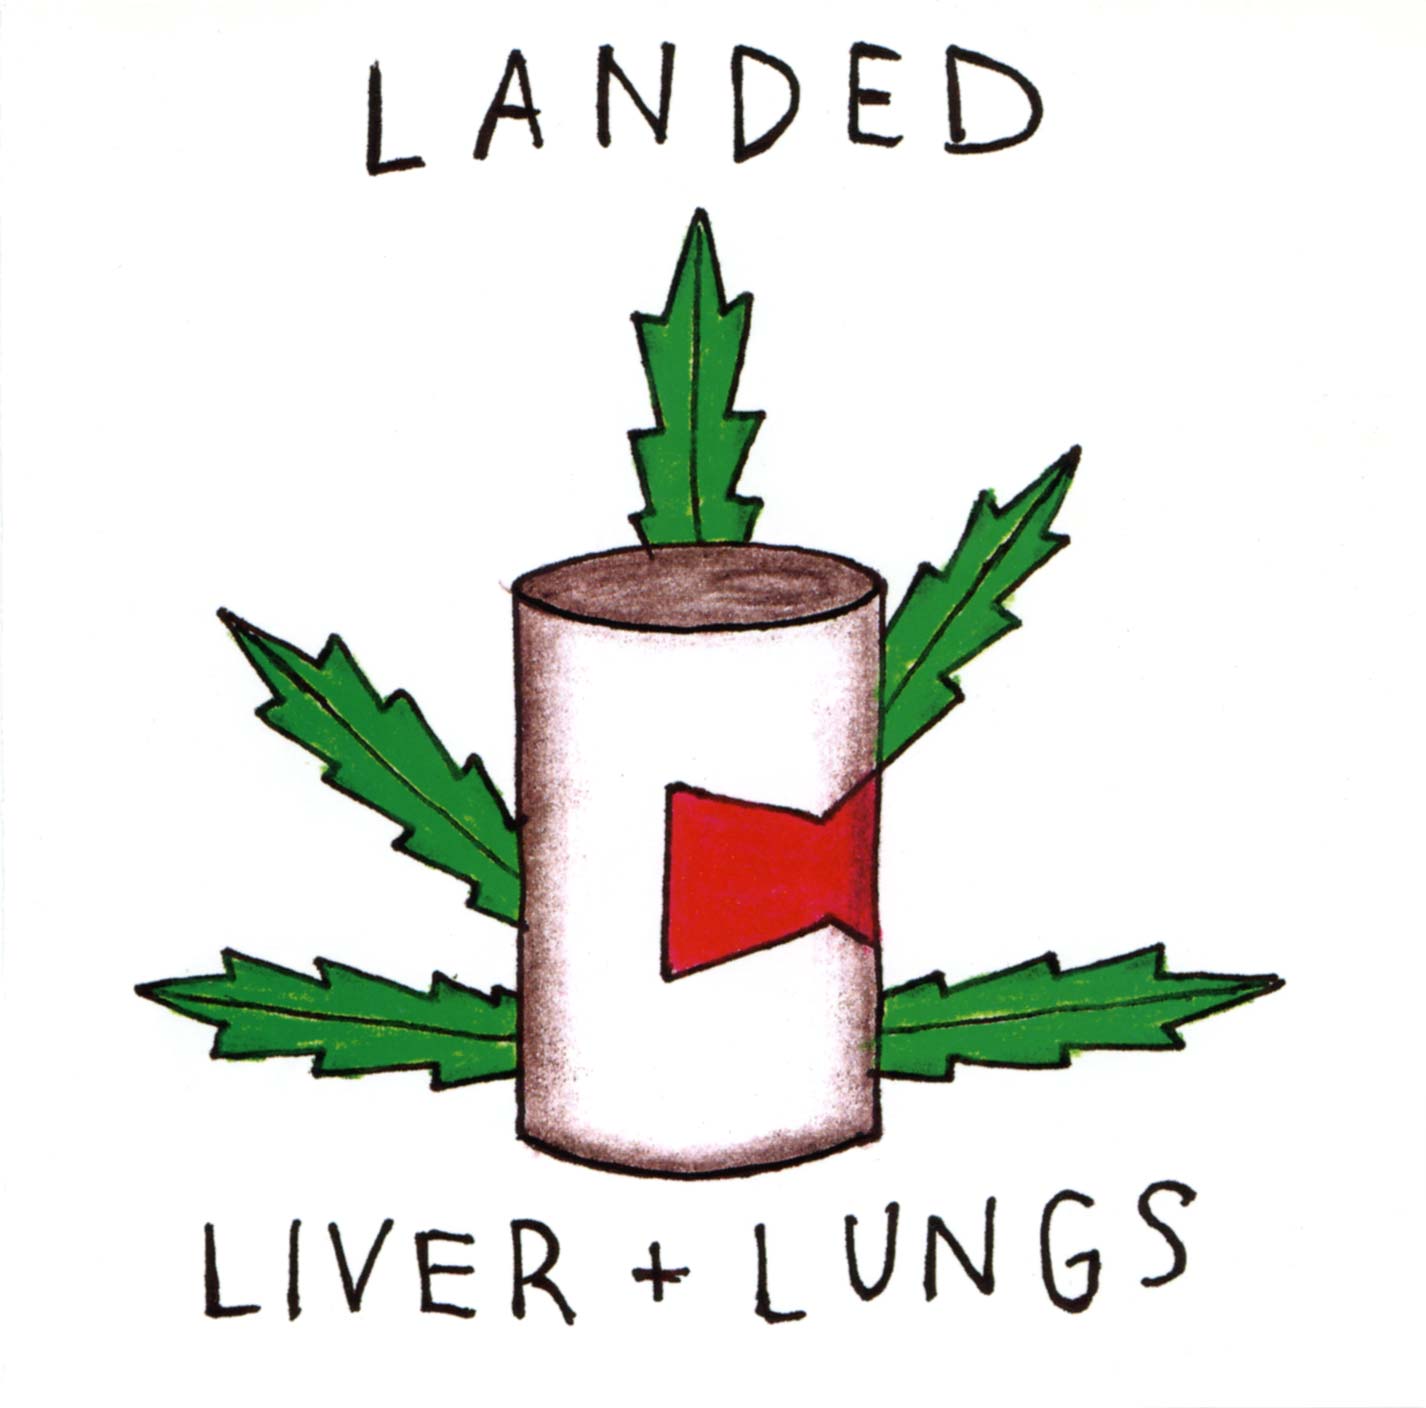 Landed Liver + Lungs - Monoroid